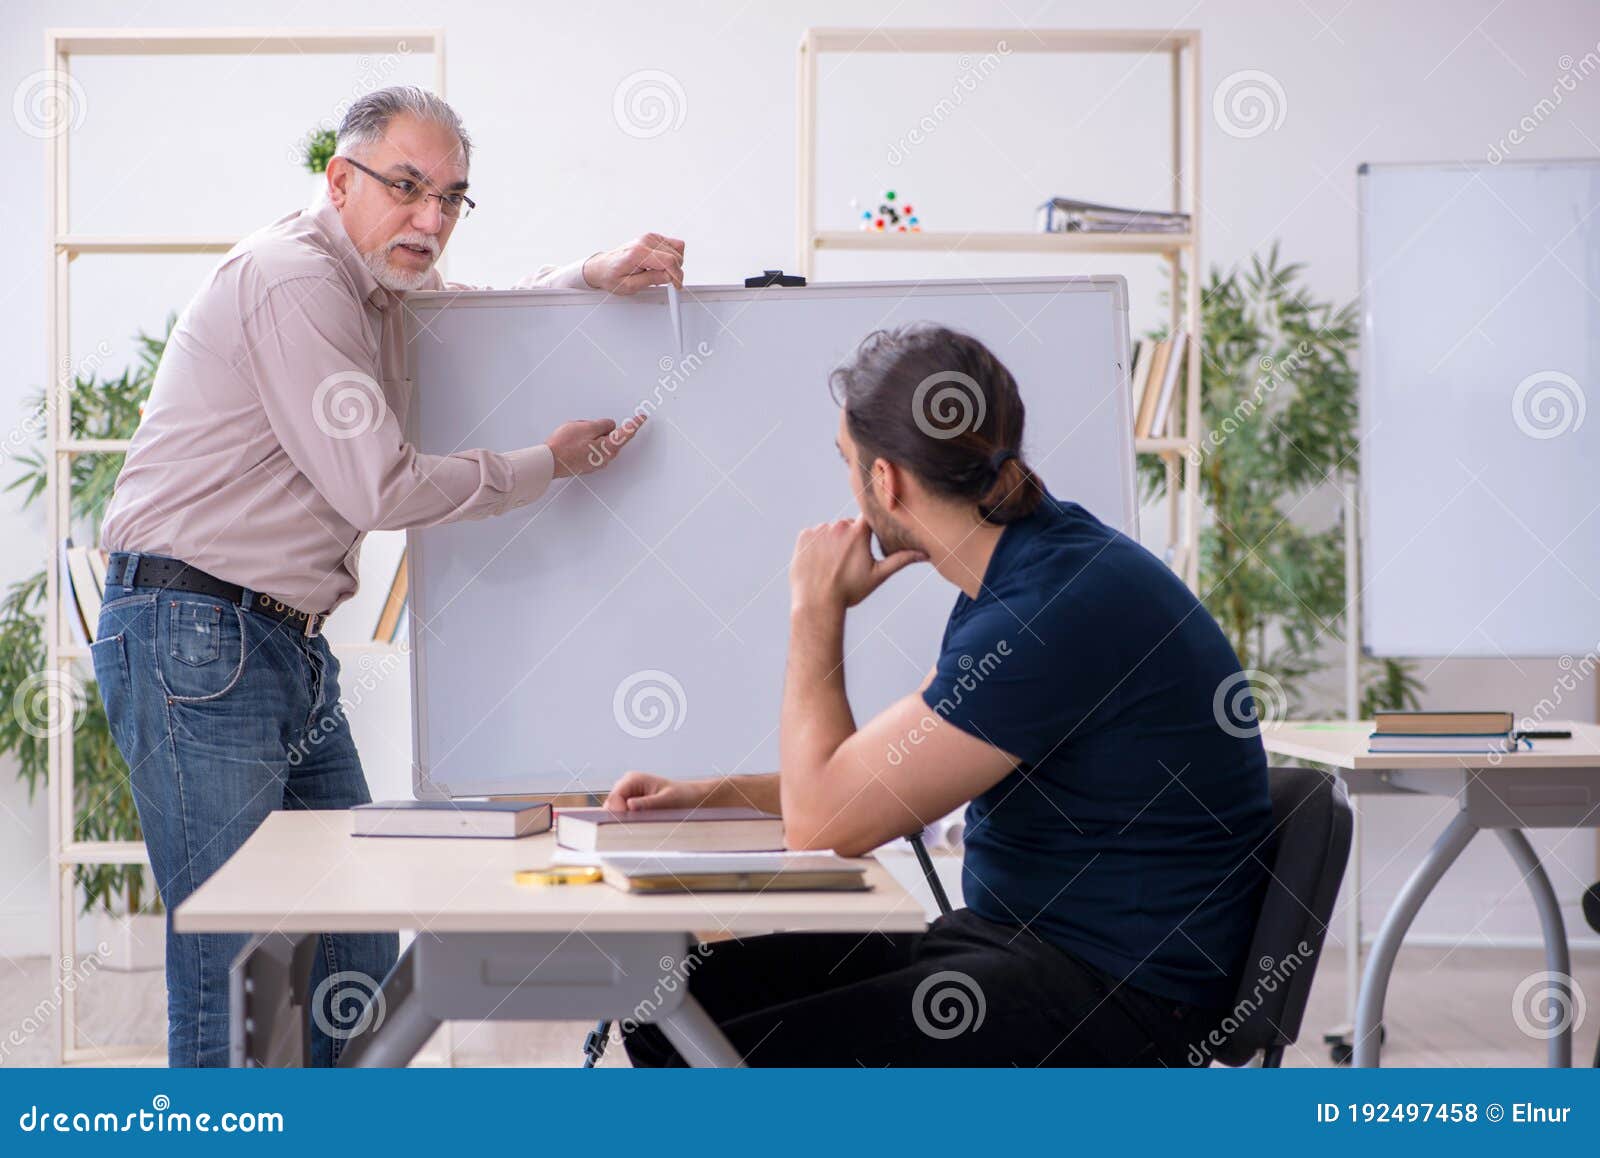 Old Teacher And Young Male Student In The Classroom Stock Photo Image